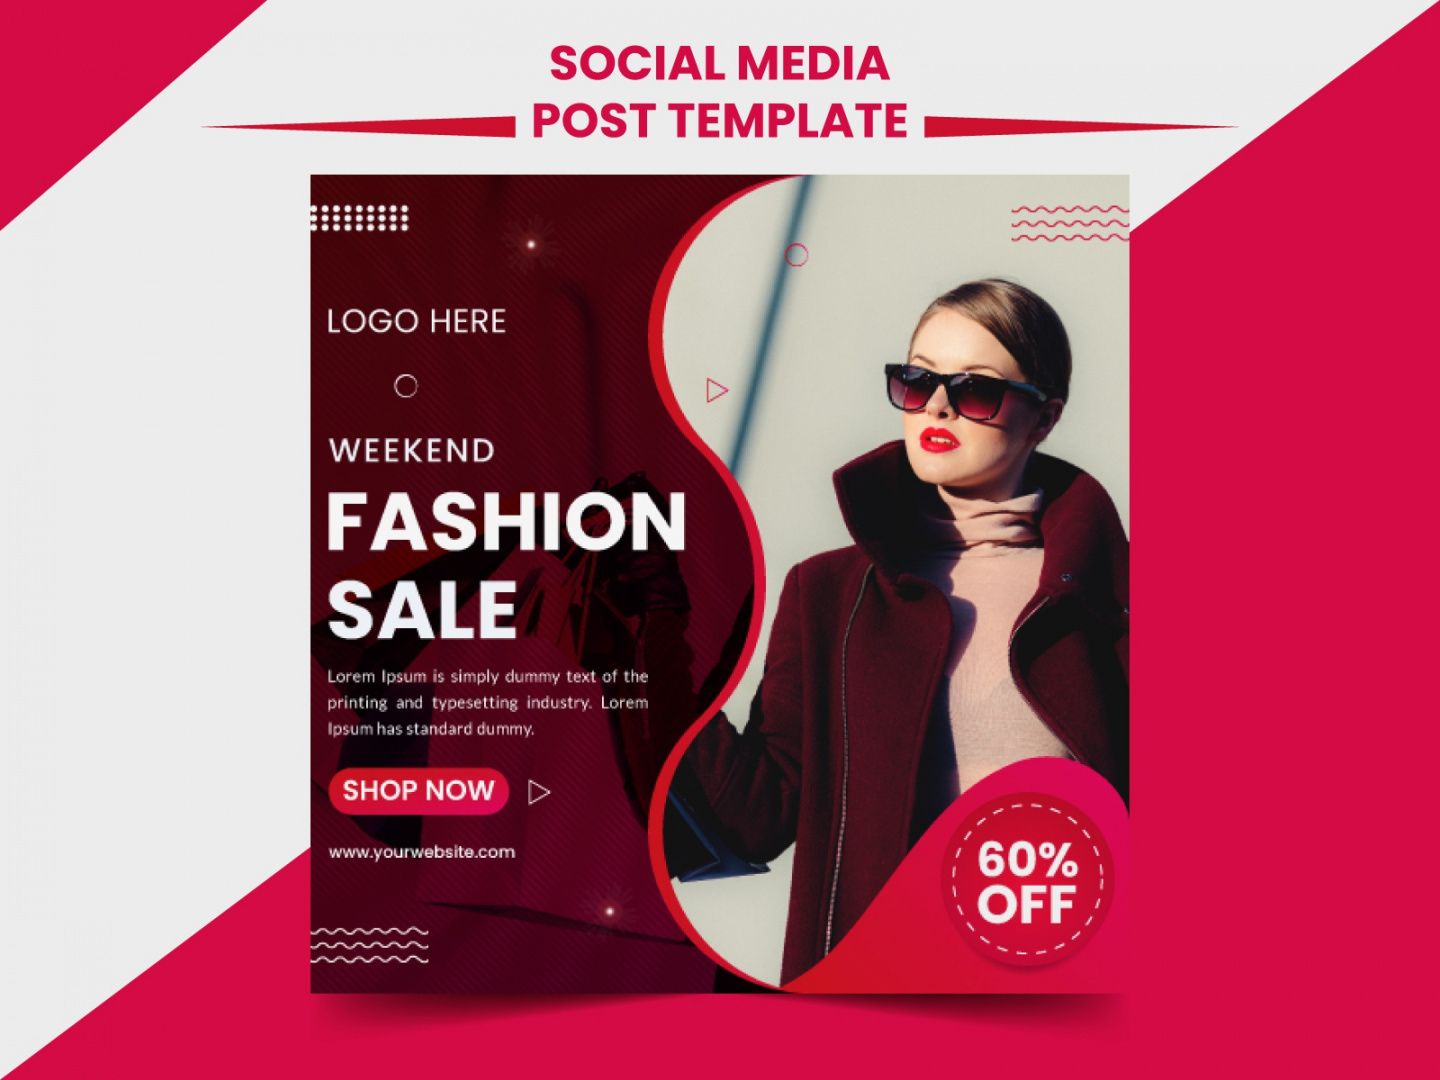 sample fashion sale social media banner design vector template by mohammad product sale banner design template pdf